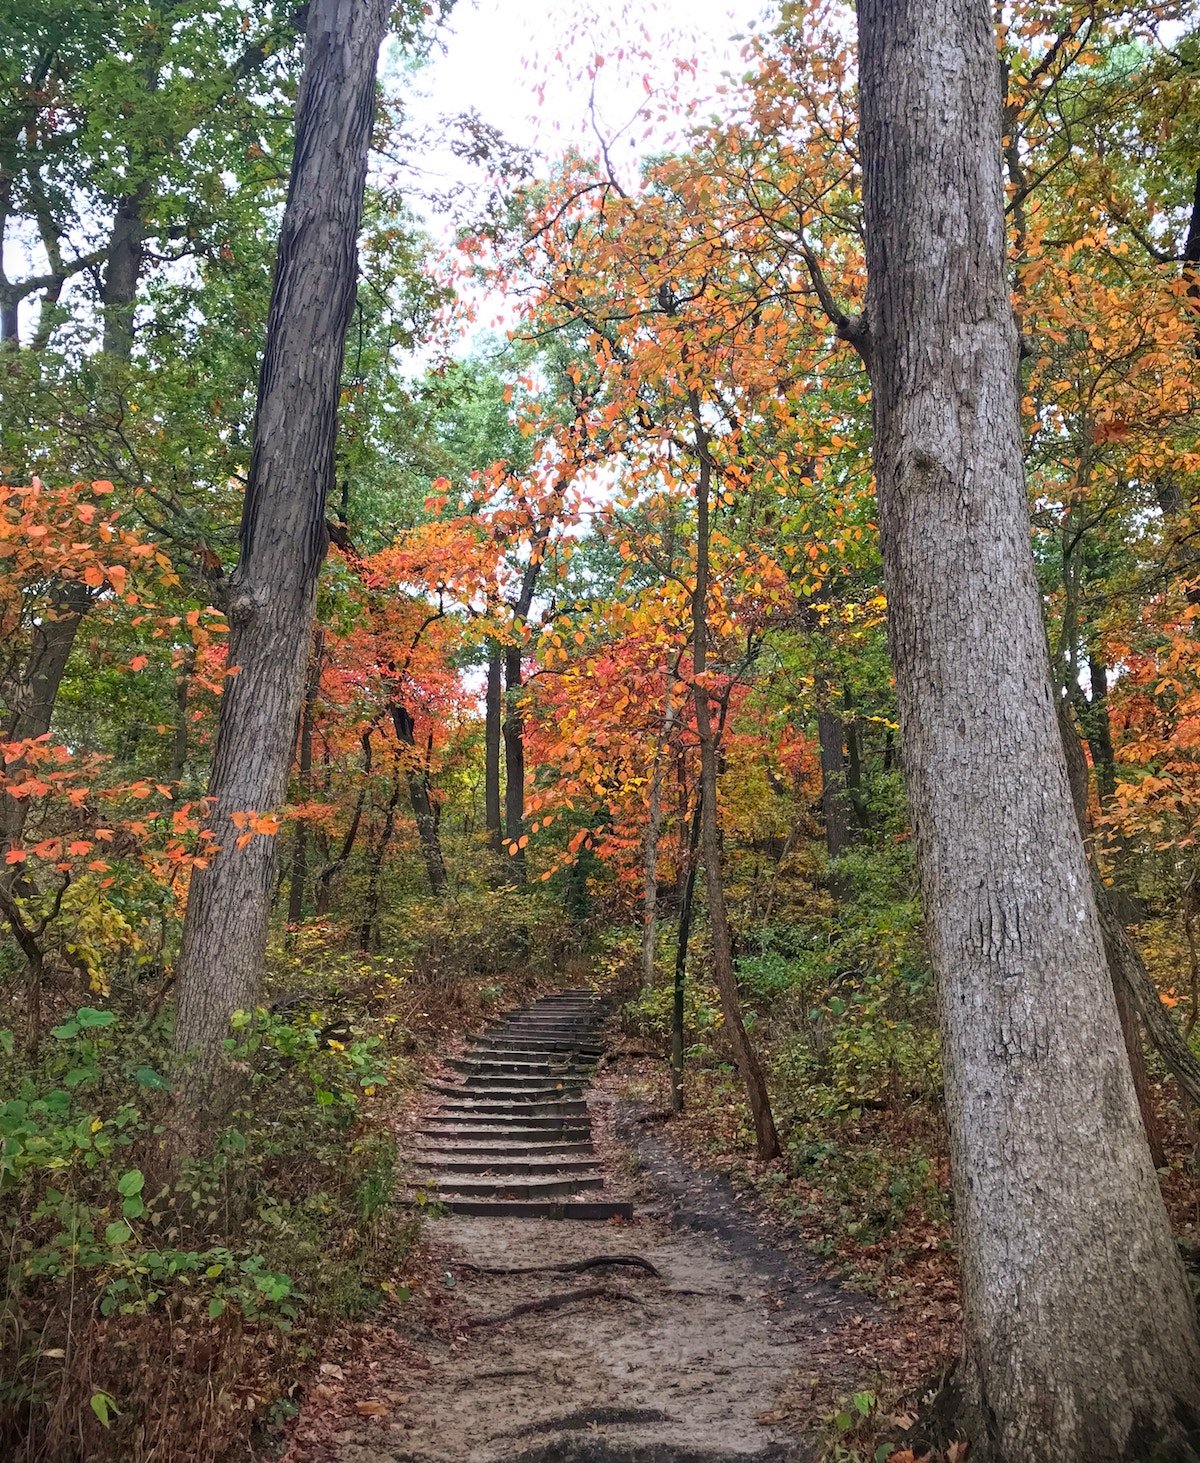 trees with fall foliage lining a trail with wooden steps